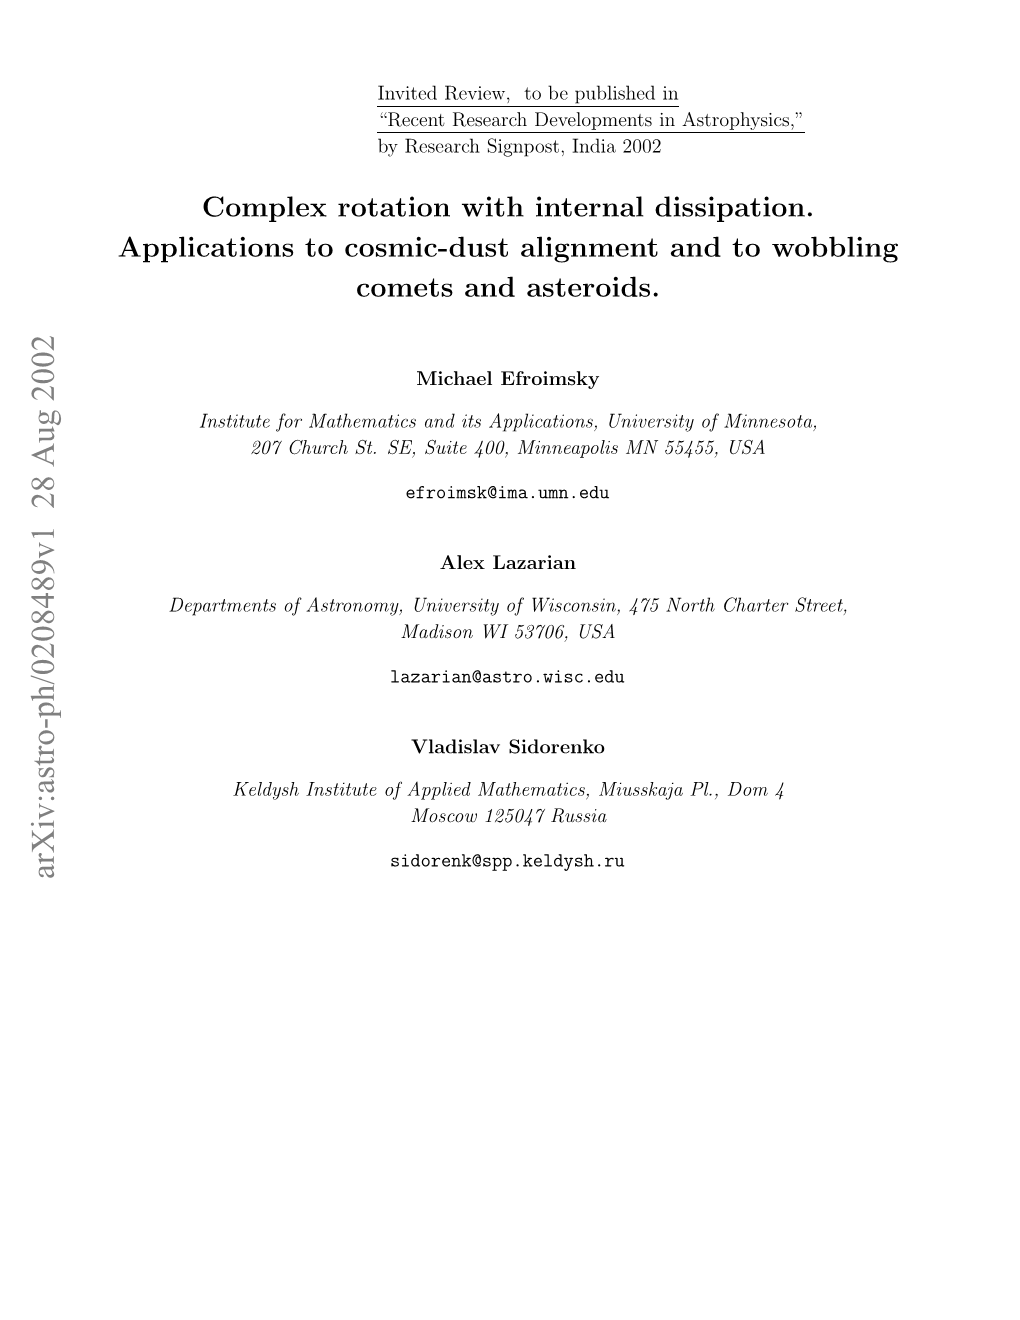 Complex Rotation with Internal Dissipation. Applications to Cosmic